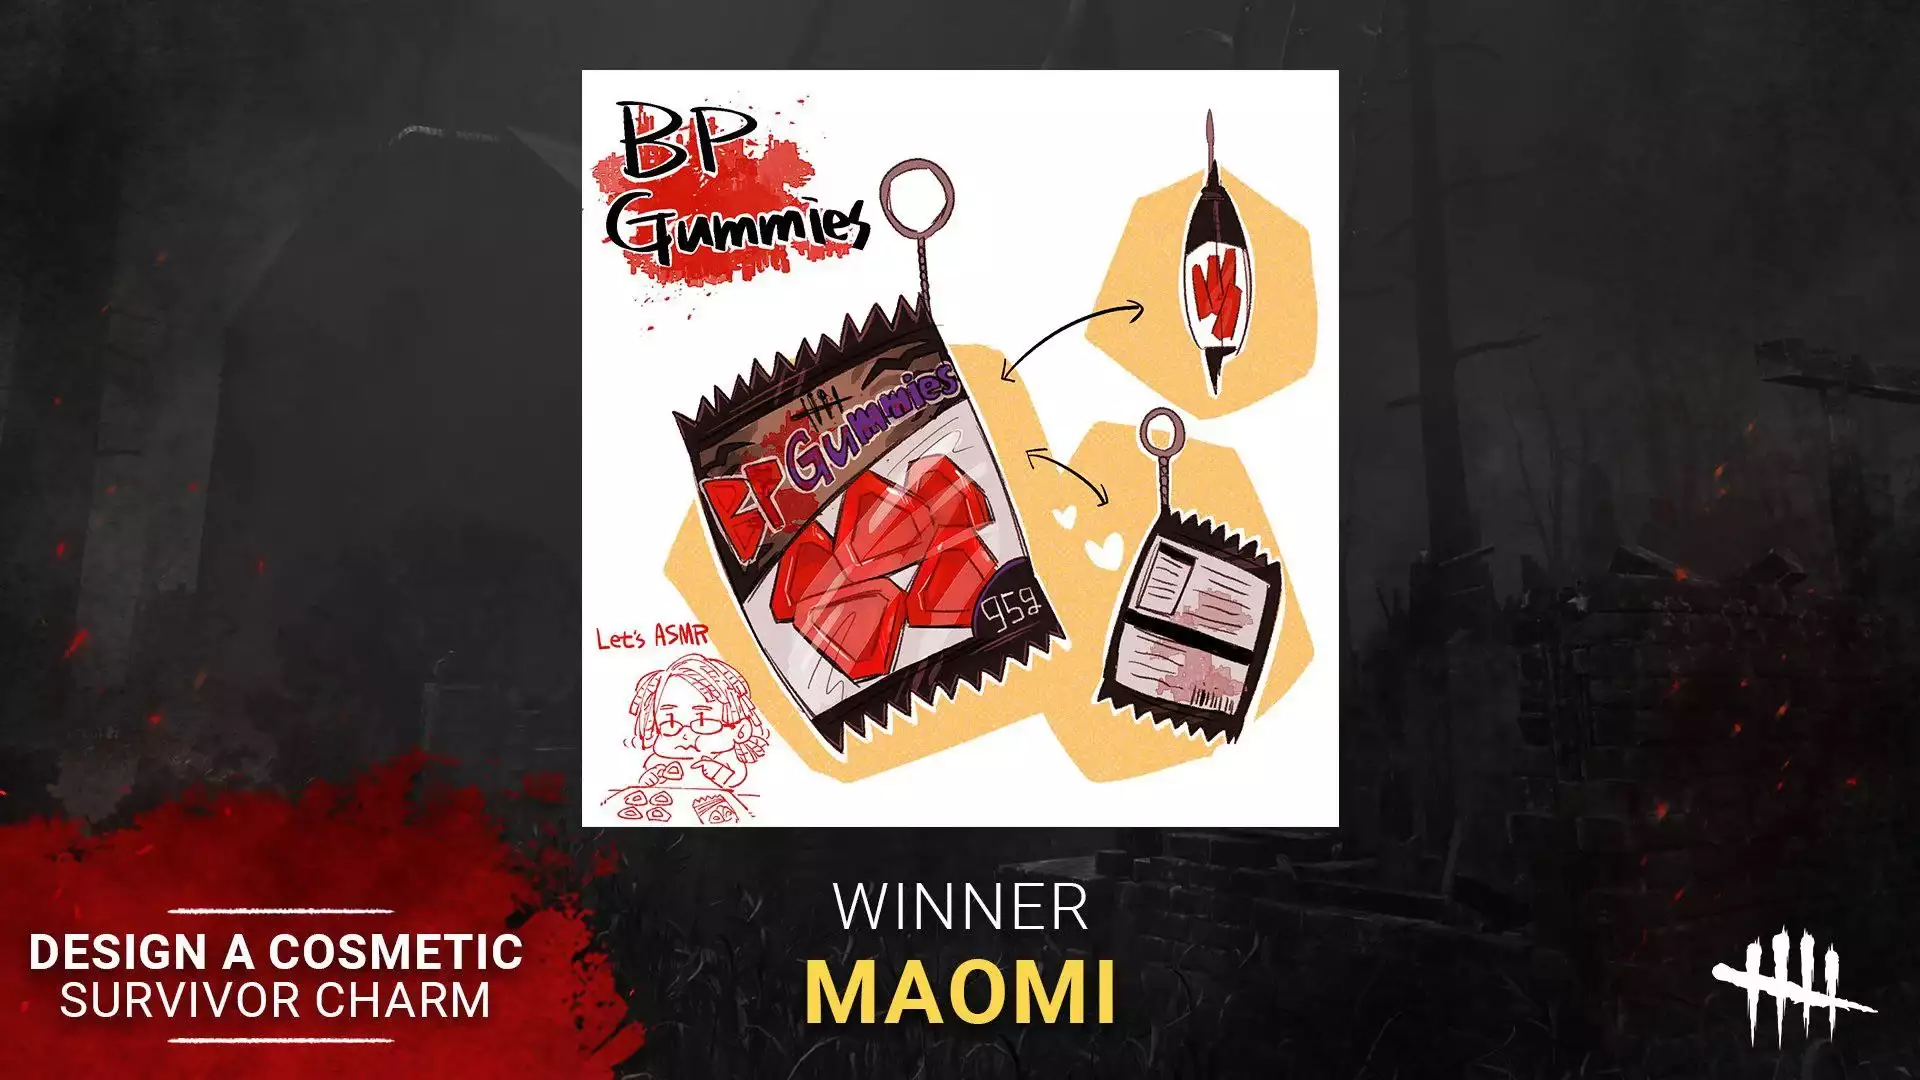 The winning survivor charm cosmetic in 2022